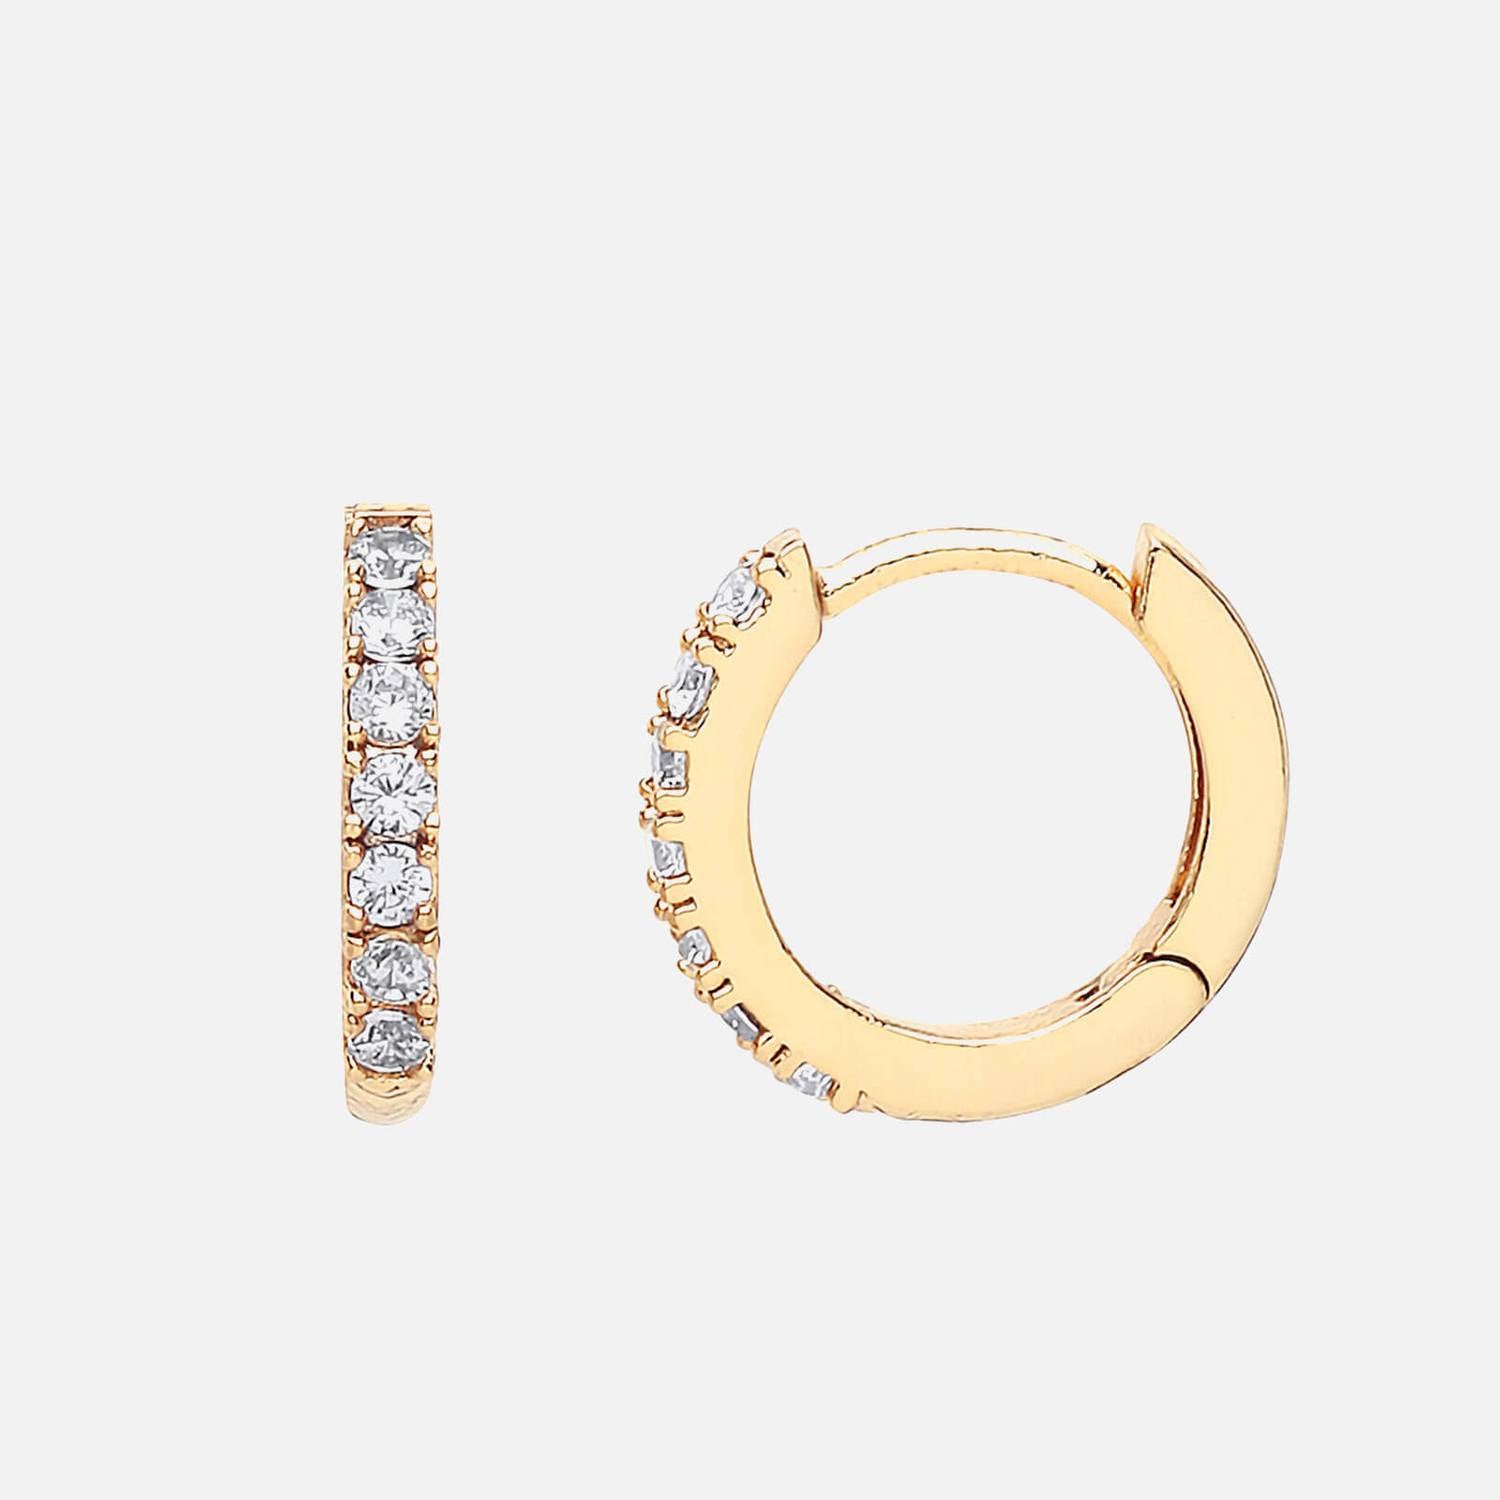 Gold Plated Granulated Pave Earrings with White CZ by Estella Bartlett